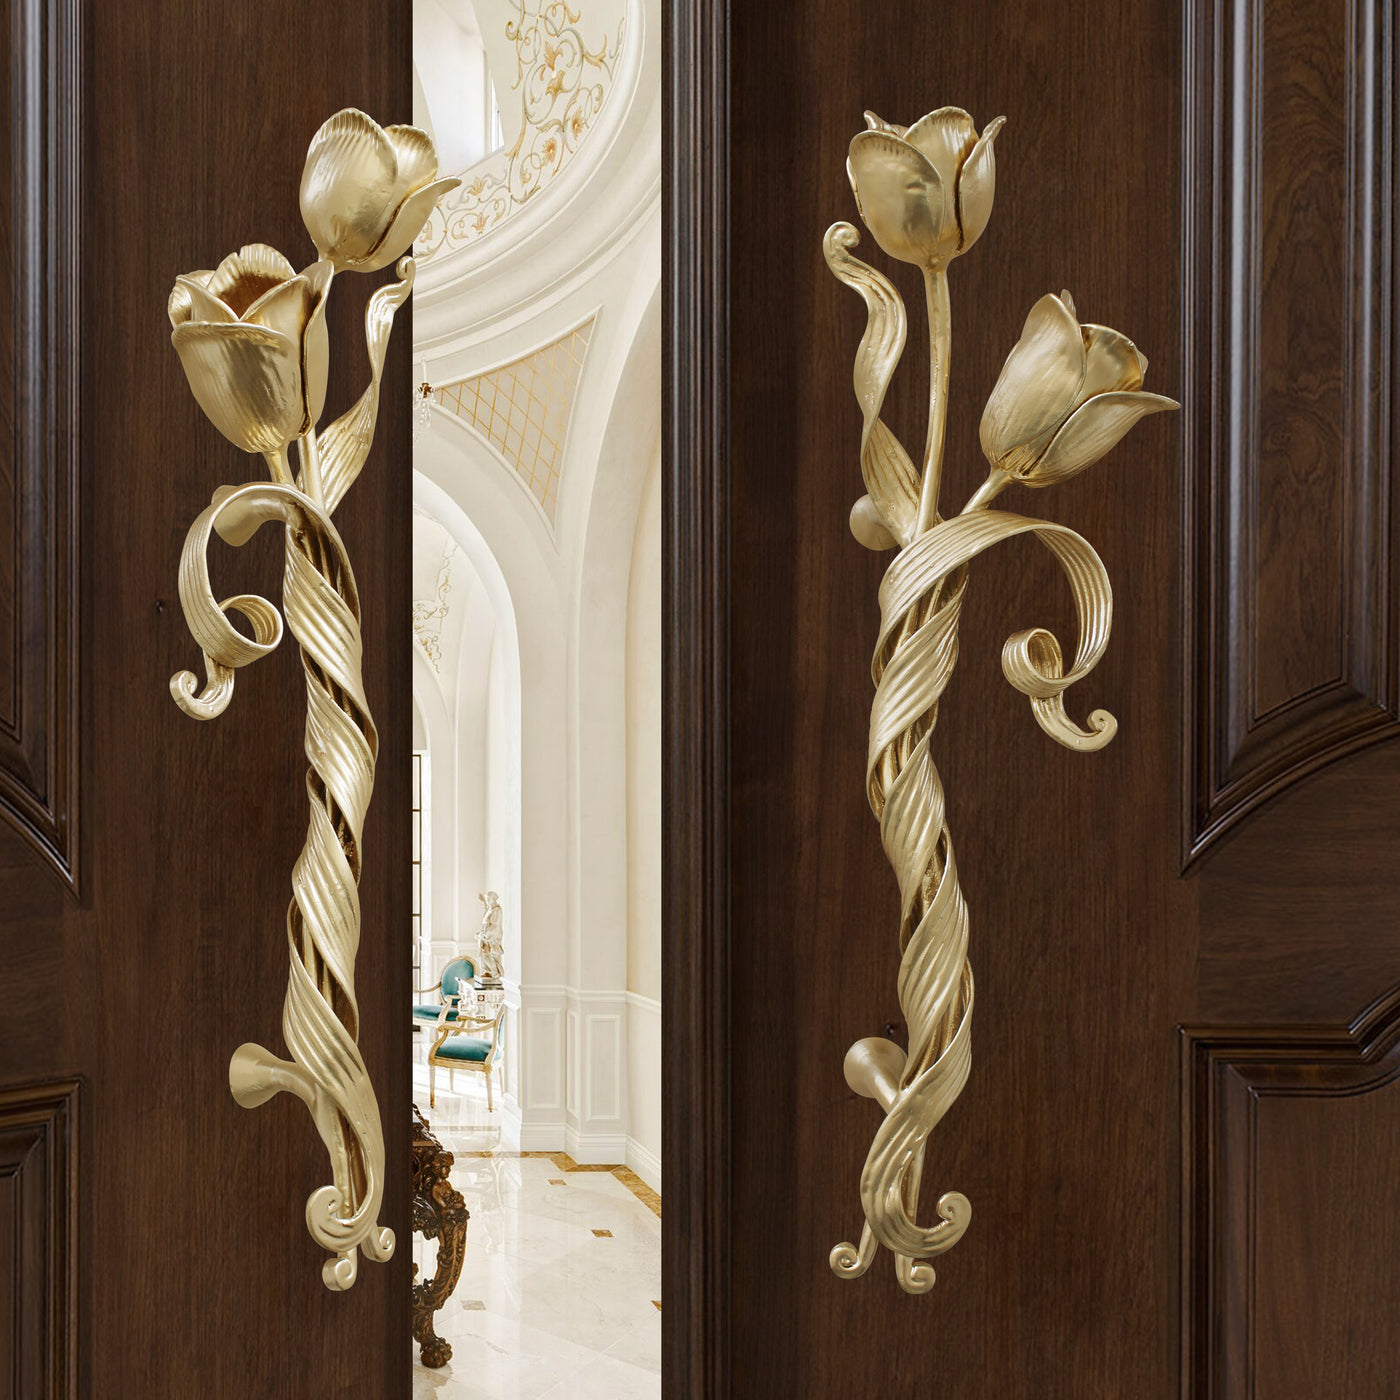 Pair of golden decorative pull handles inspired by tulips mounted on an opened wooden door